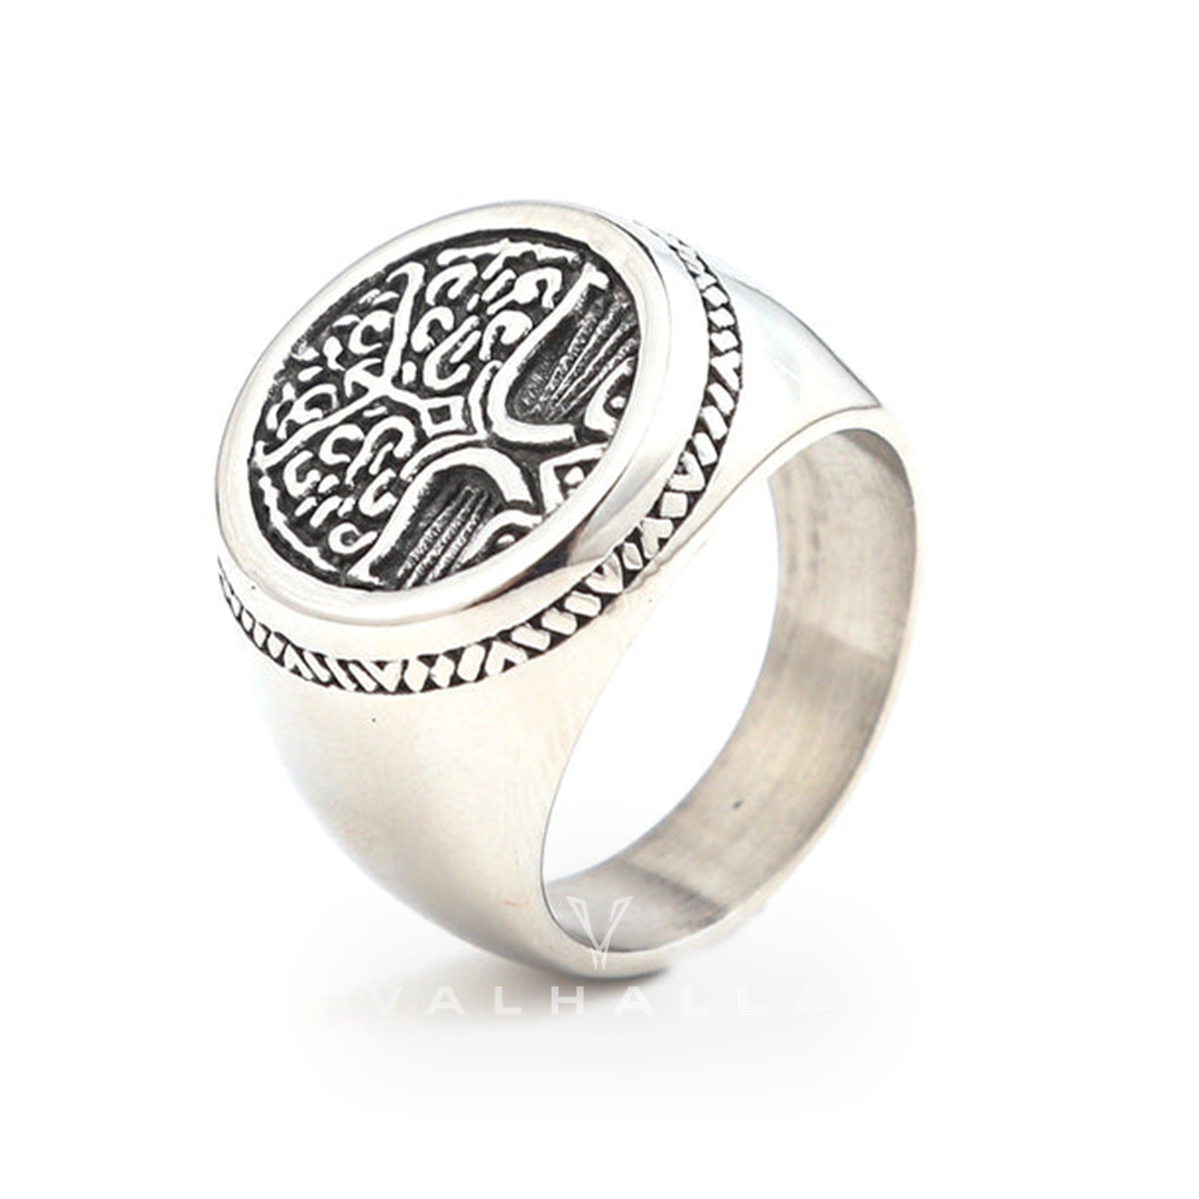 Handcrafted Stainless Steel Yggdrasil / Tree of Life Circular Ring